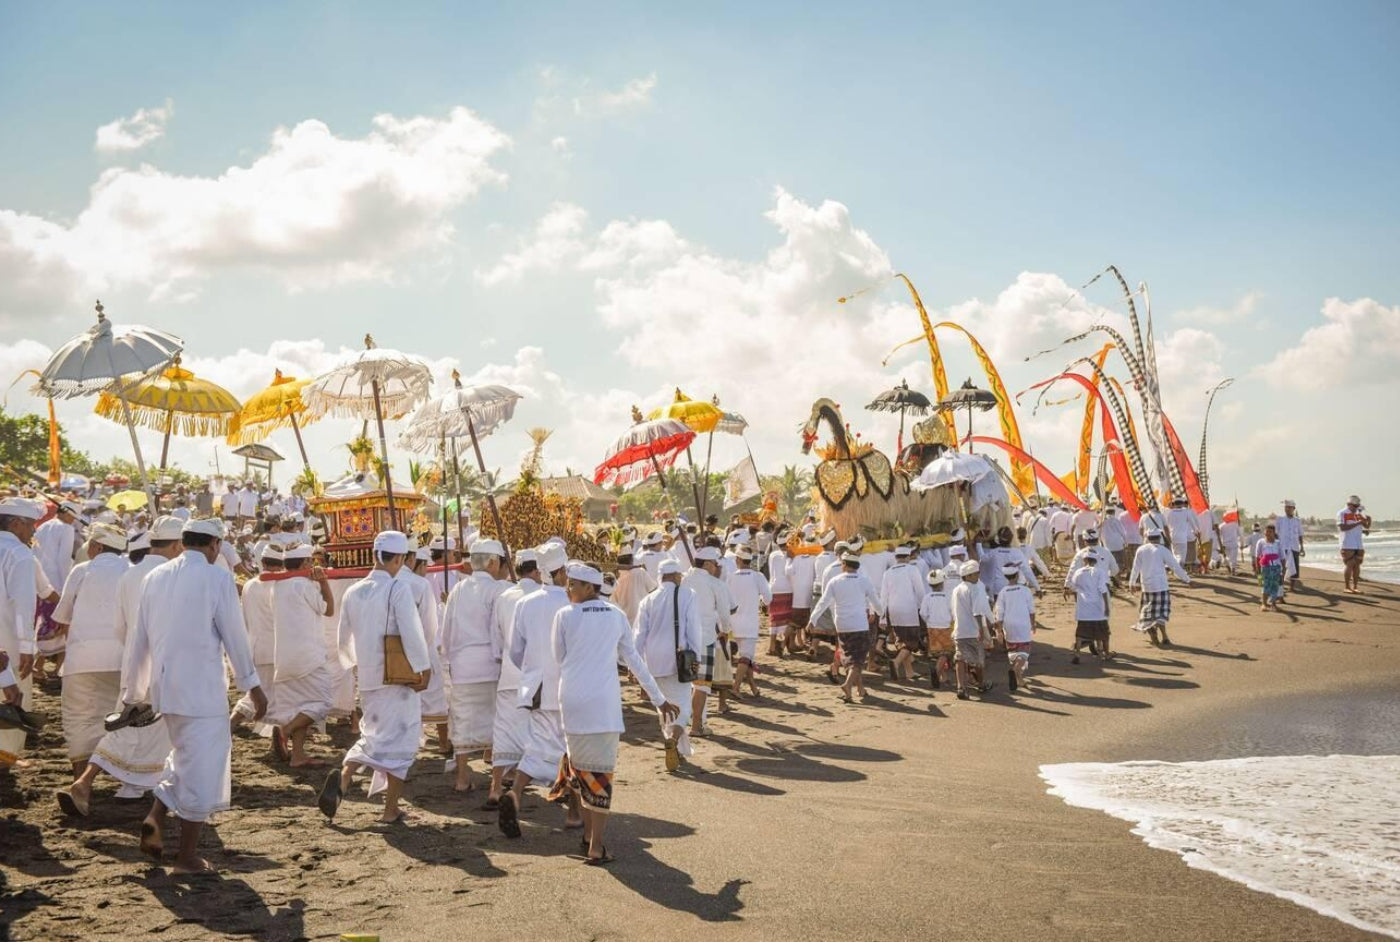 In the heart of Bali, where emerald rice paddies meet the azure sea, there exists a tradition as old as time itself, Melasti, a sacred ceremony that heralds the arrival of the Balinese New Year.